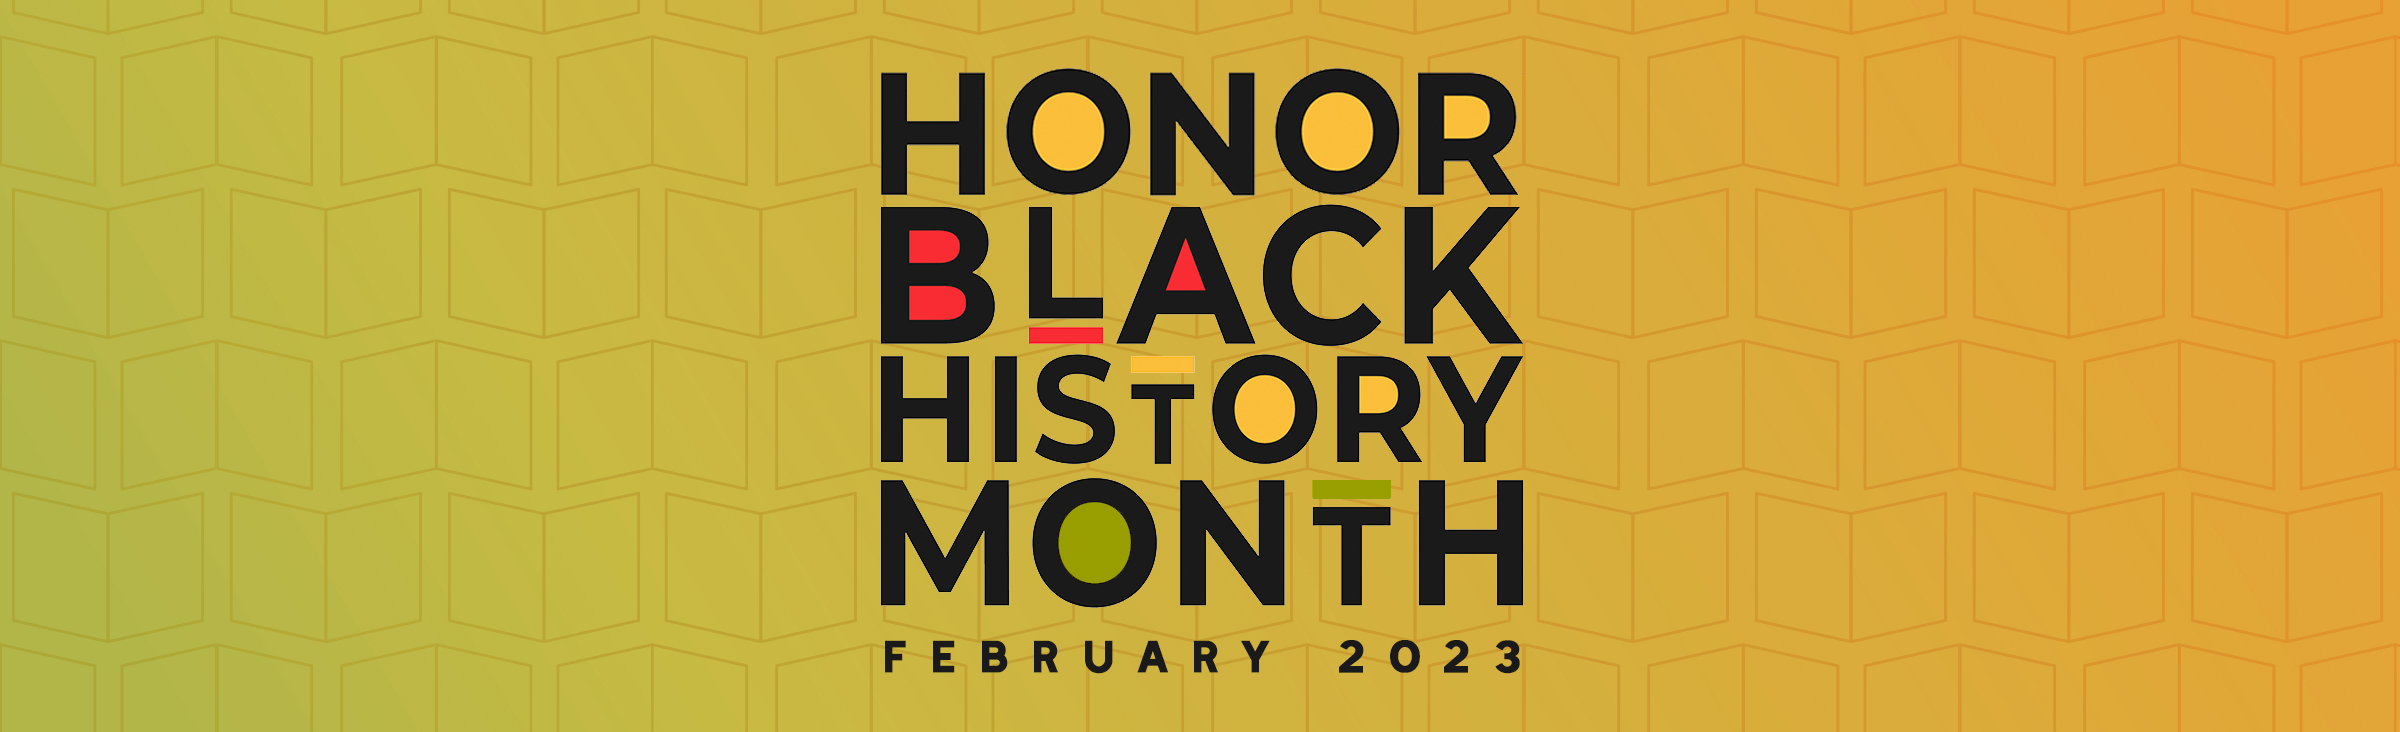 Black History Month Card